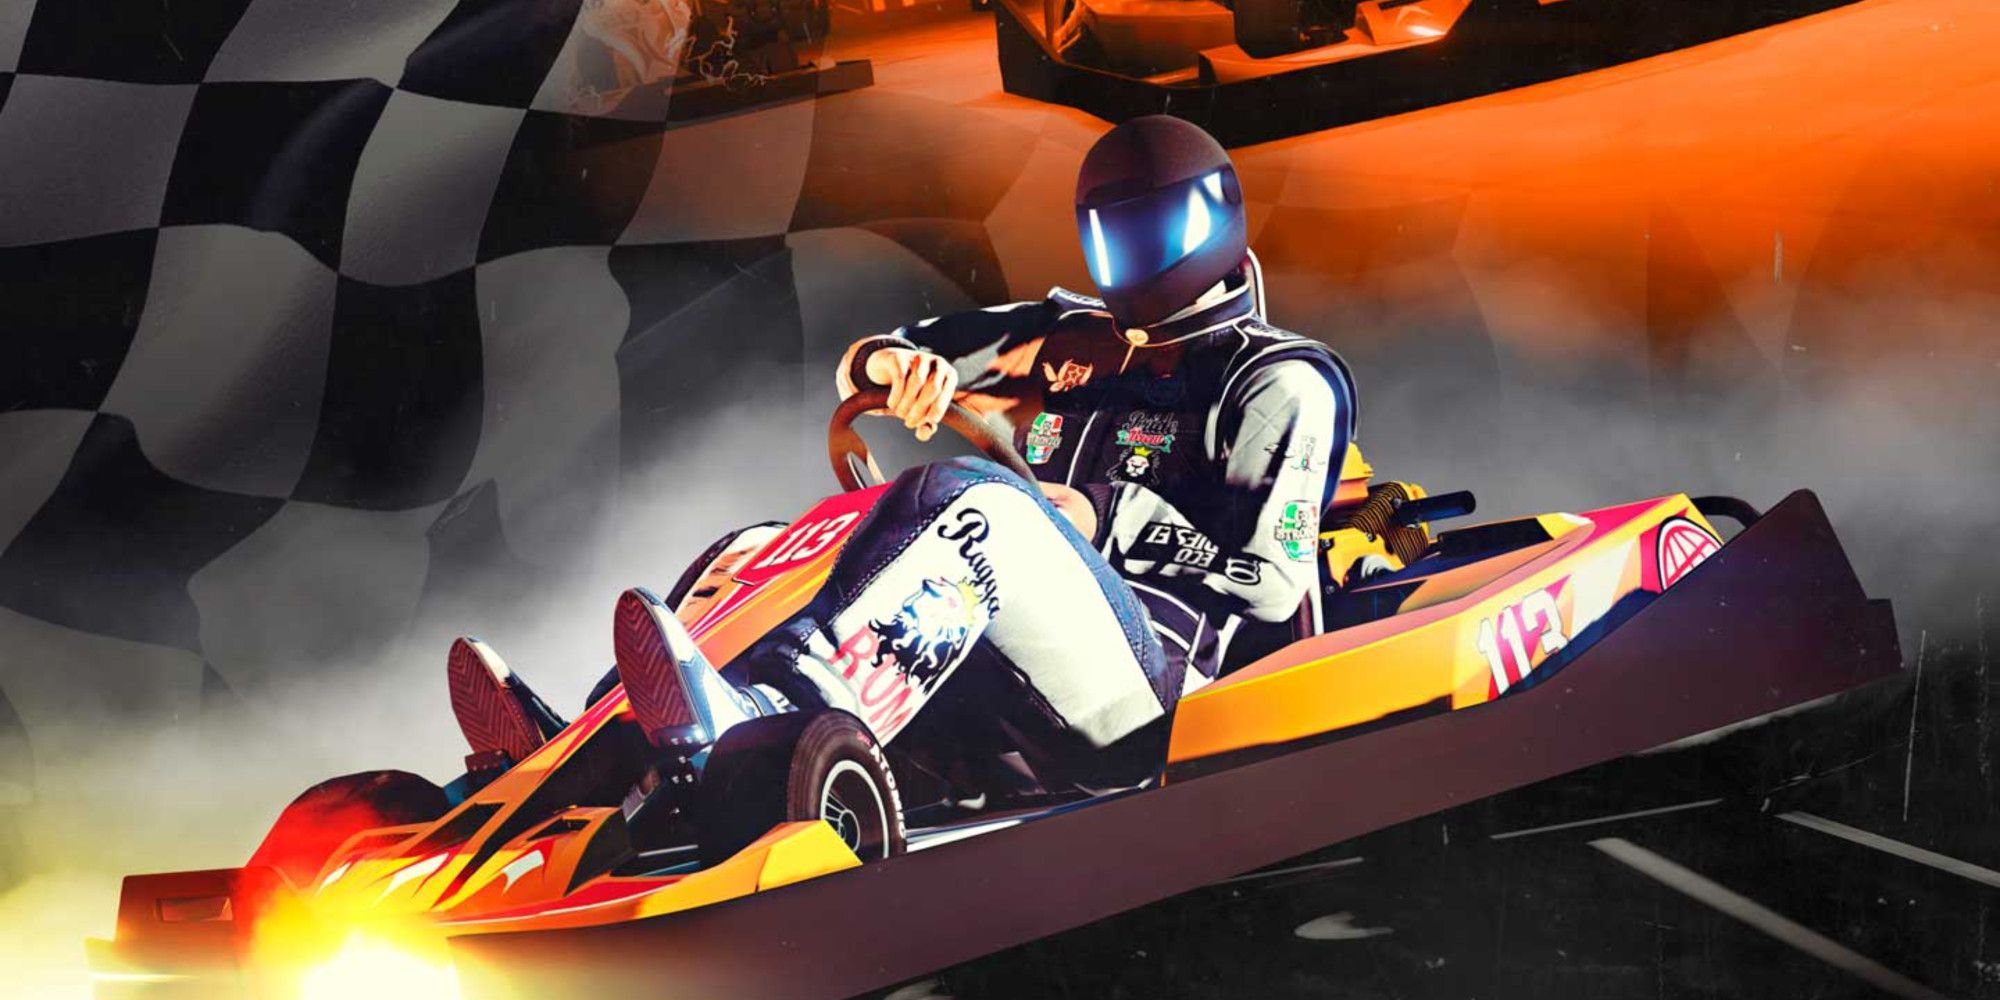 This Week In GTA Online GoKarts With Guns Cayo Perico Changes And Unlucky Daily Spin Rewards